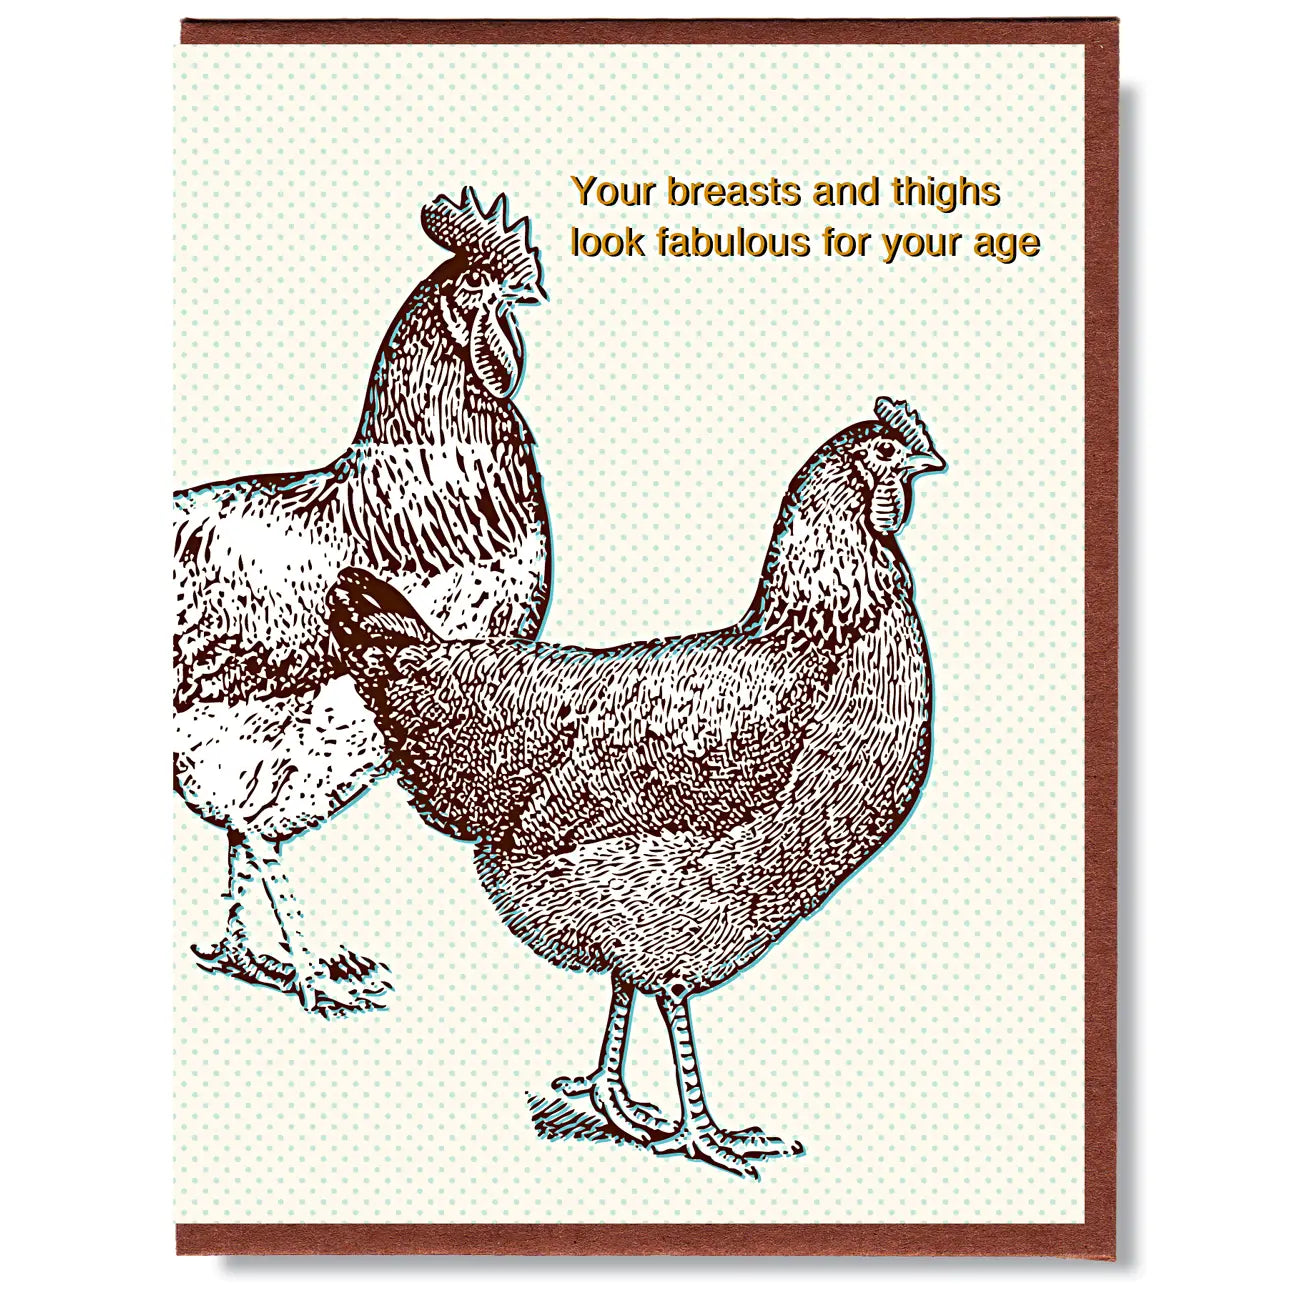 Smitten Kitten Birthday Cards Greeting Cards Smitten Kitten Your breasts and thighs look fabulous for your age  